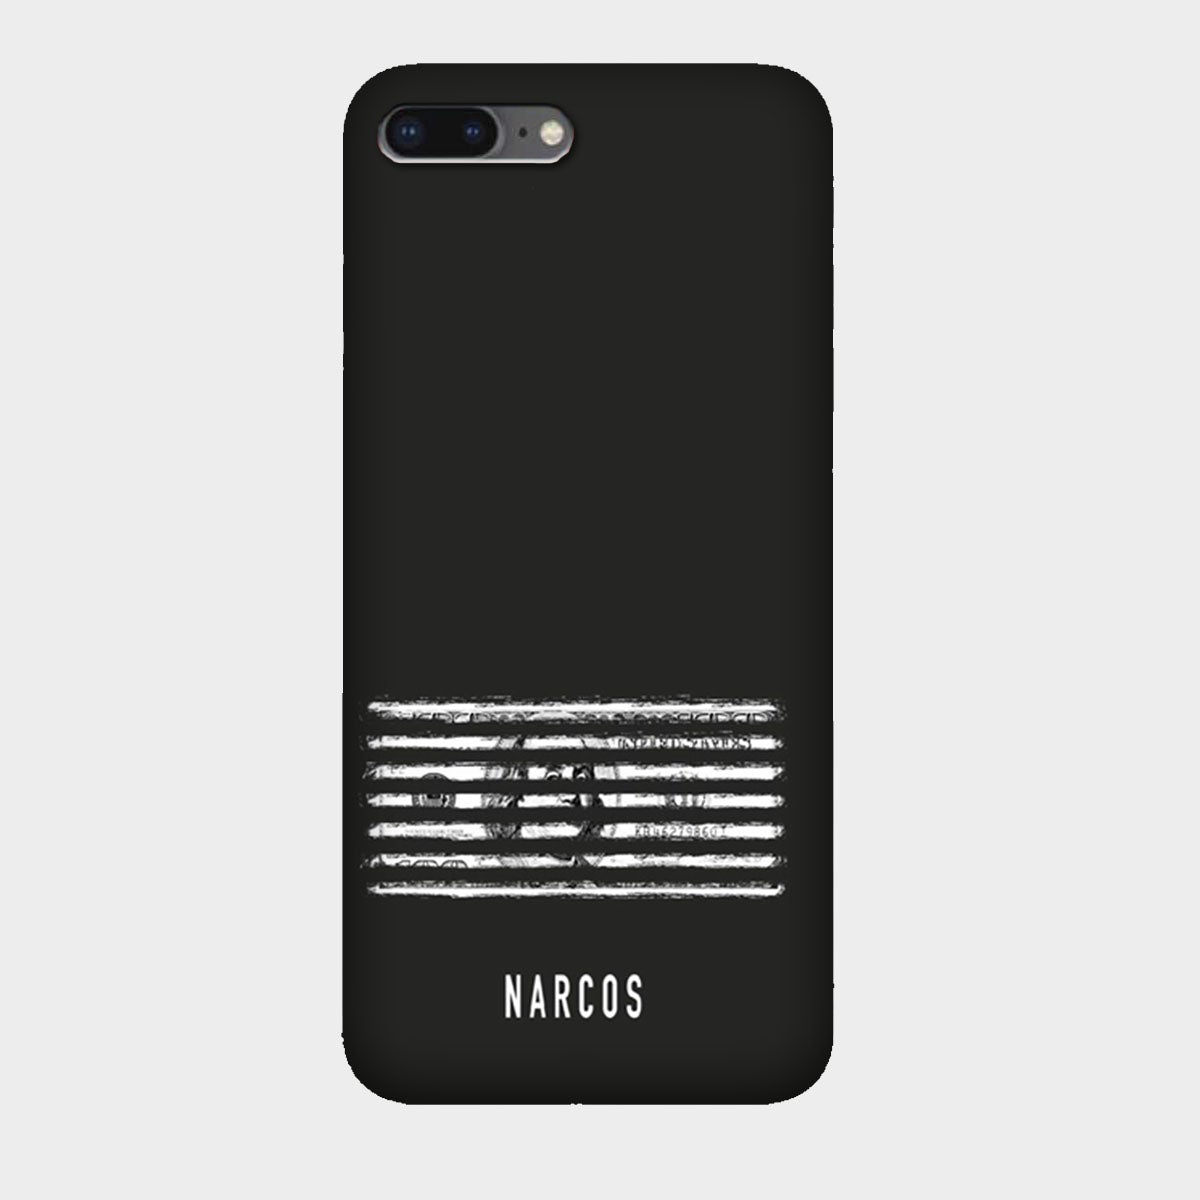 Narcos - Money & Powder - Mobile Phone Cover - Hard Case